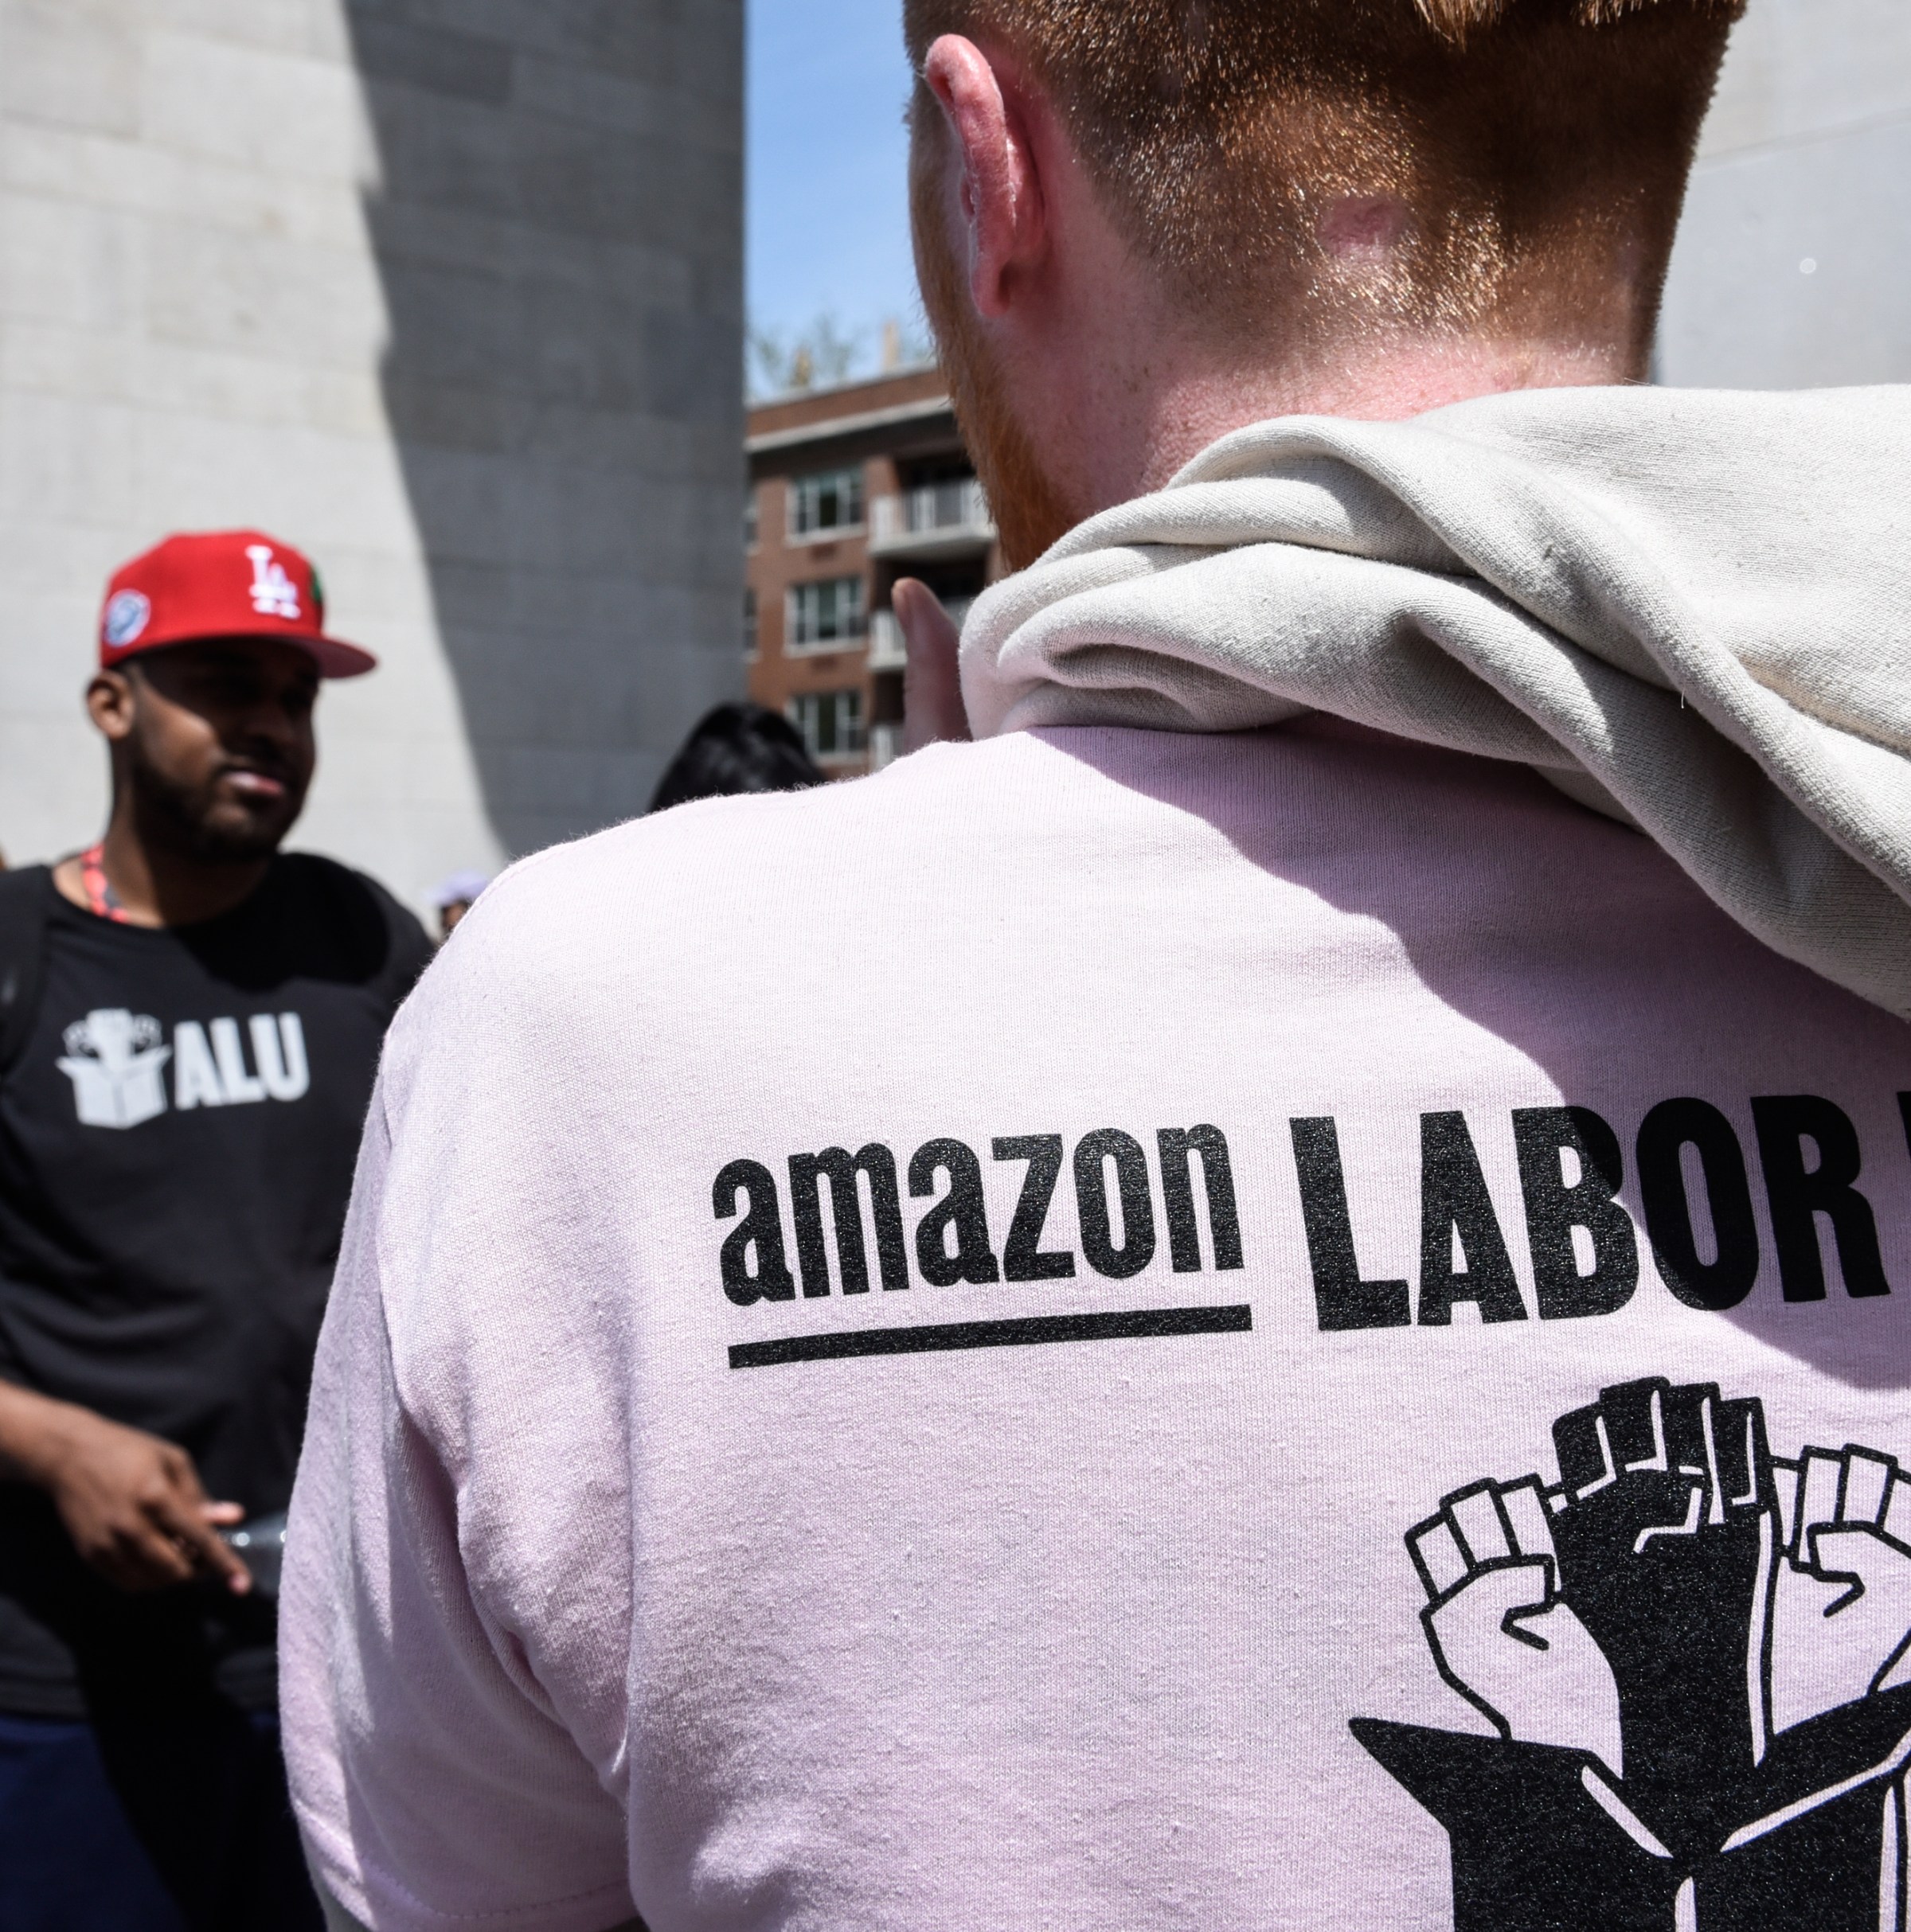 Amazon workers in upstate New York are fighting for a crucial second union win